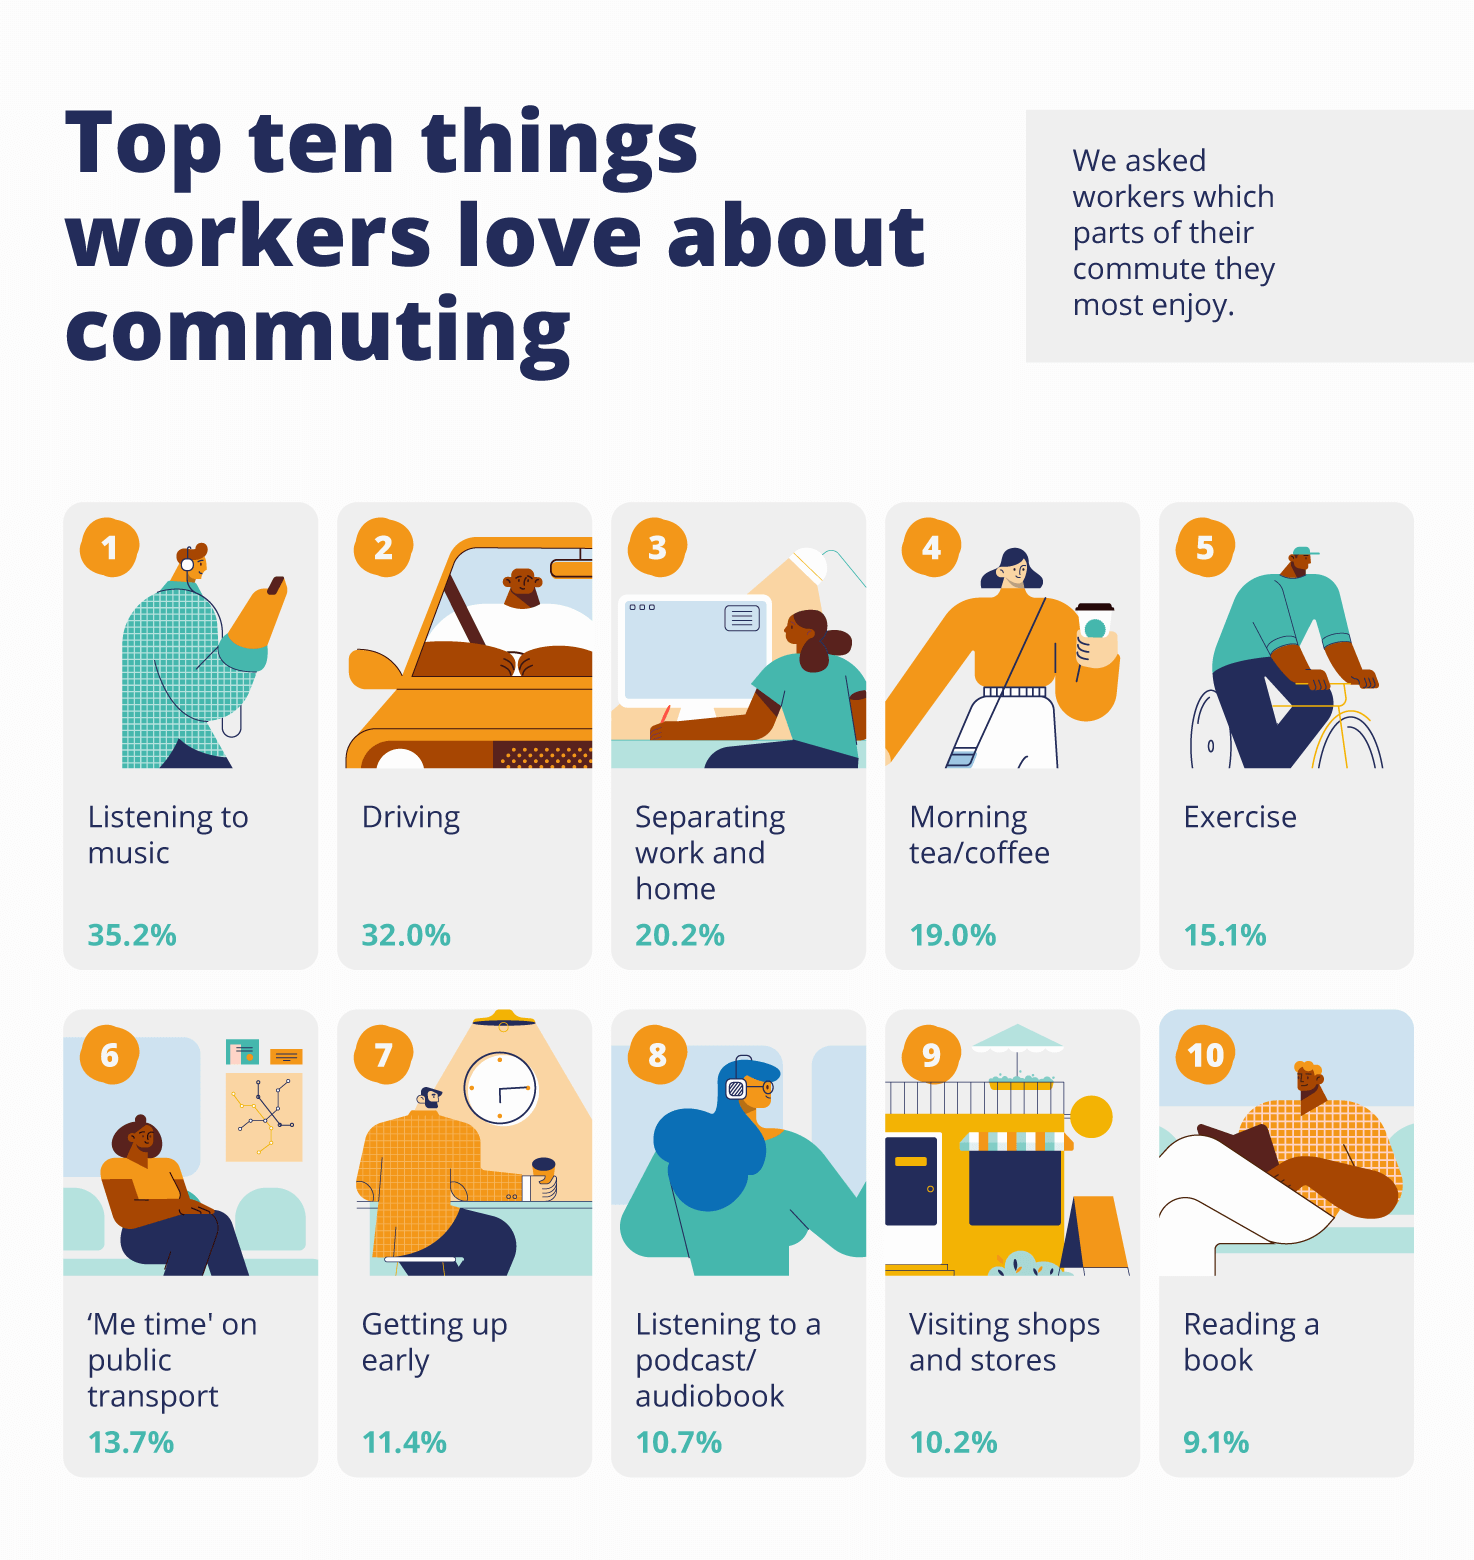 Top ten things workers love about commuting